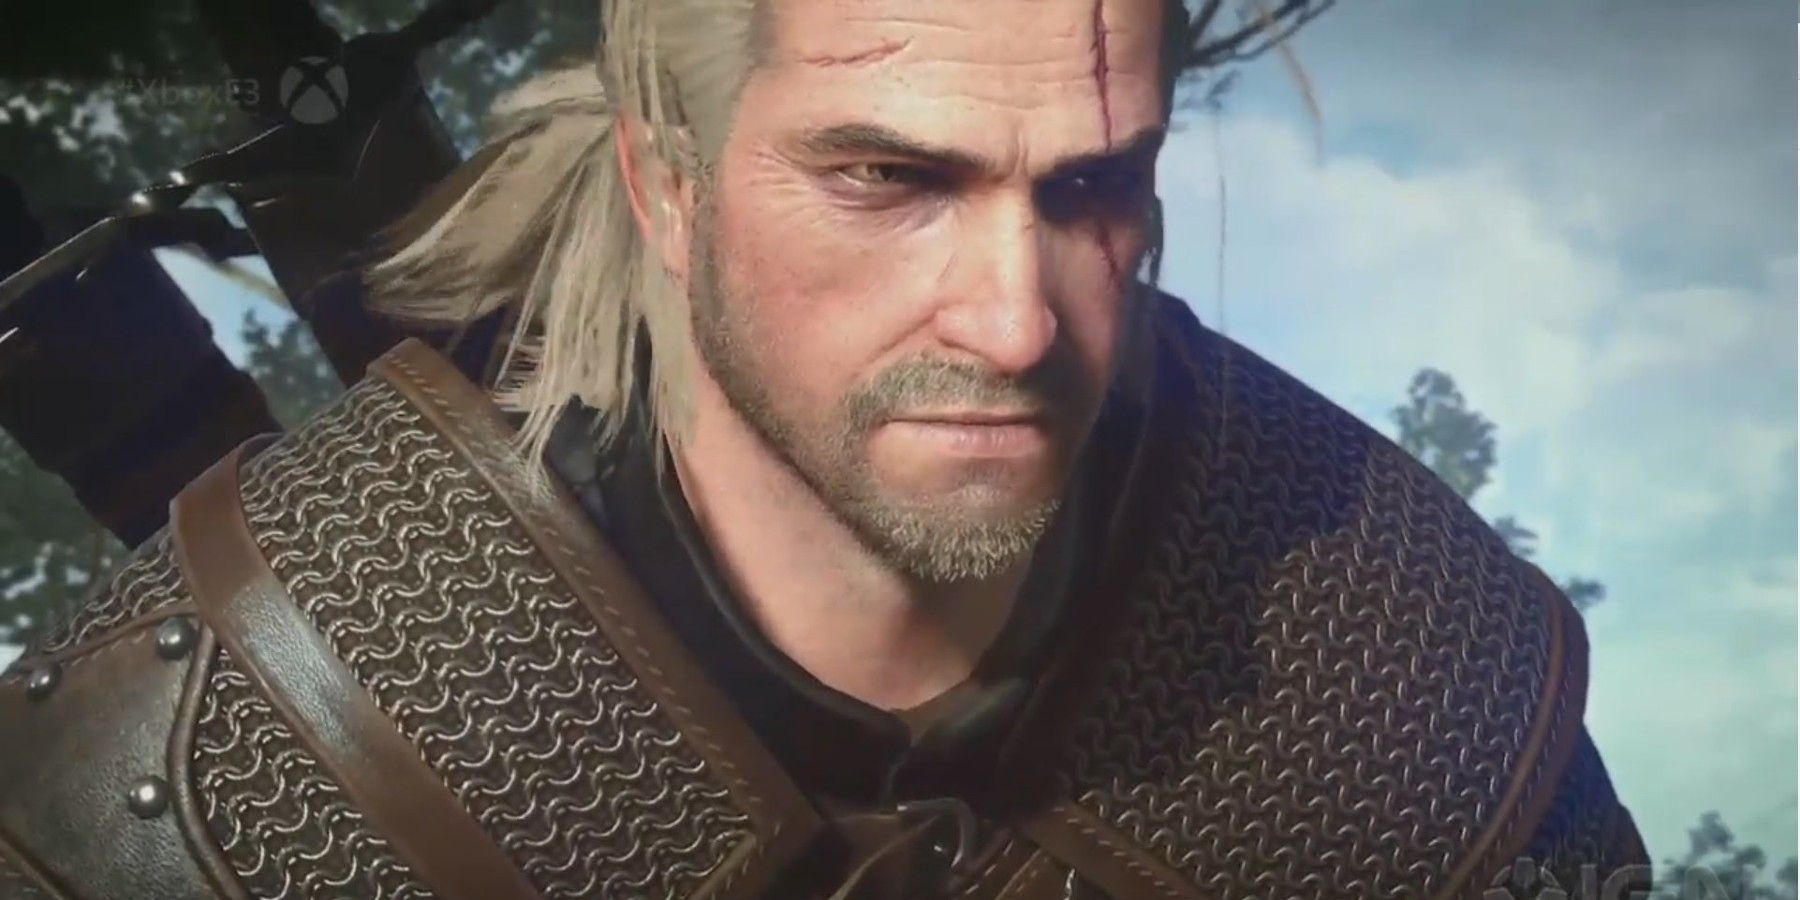 Geralt of Rivia from The Witcher 3